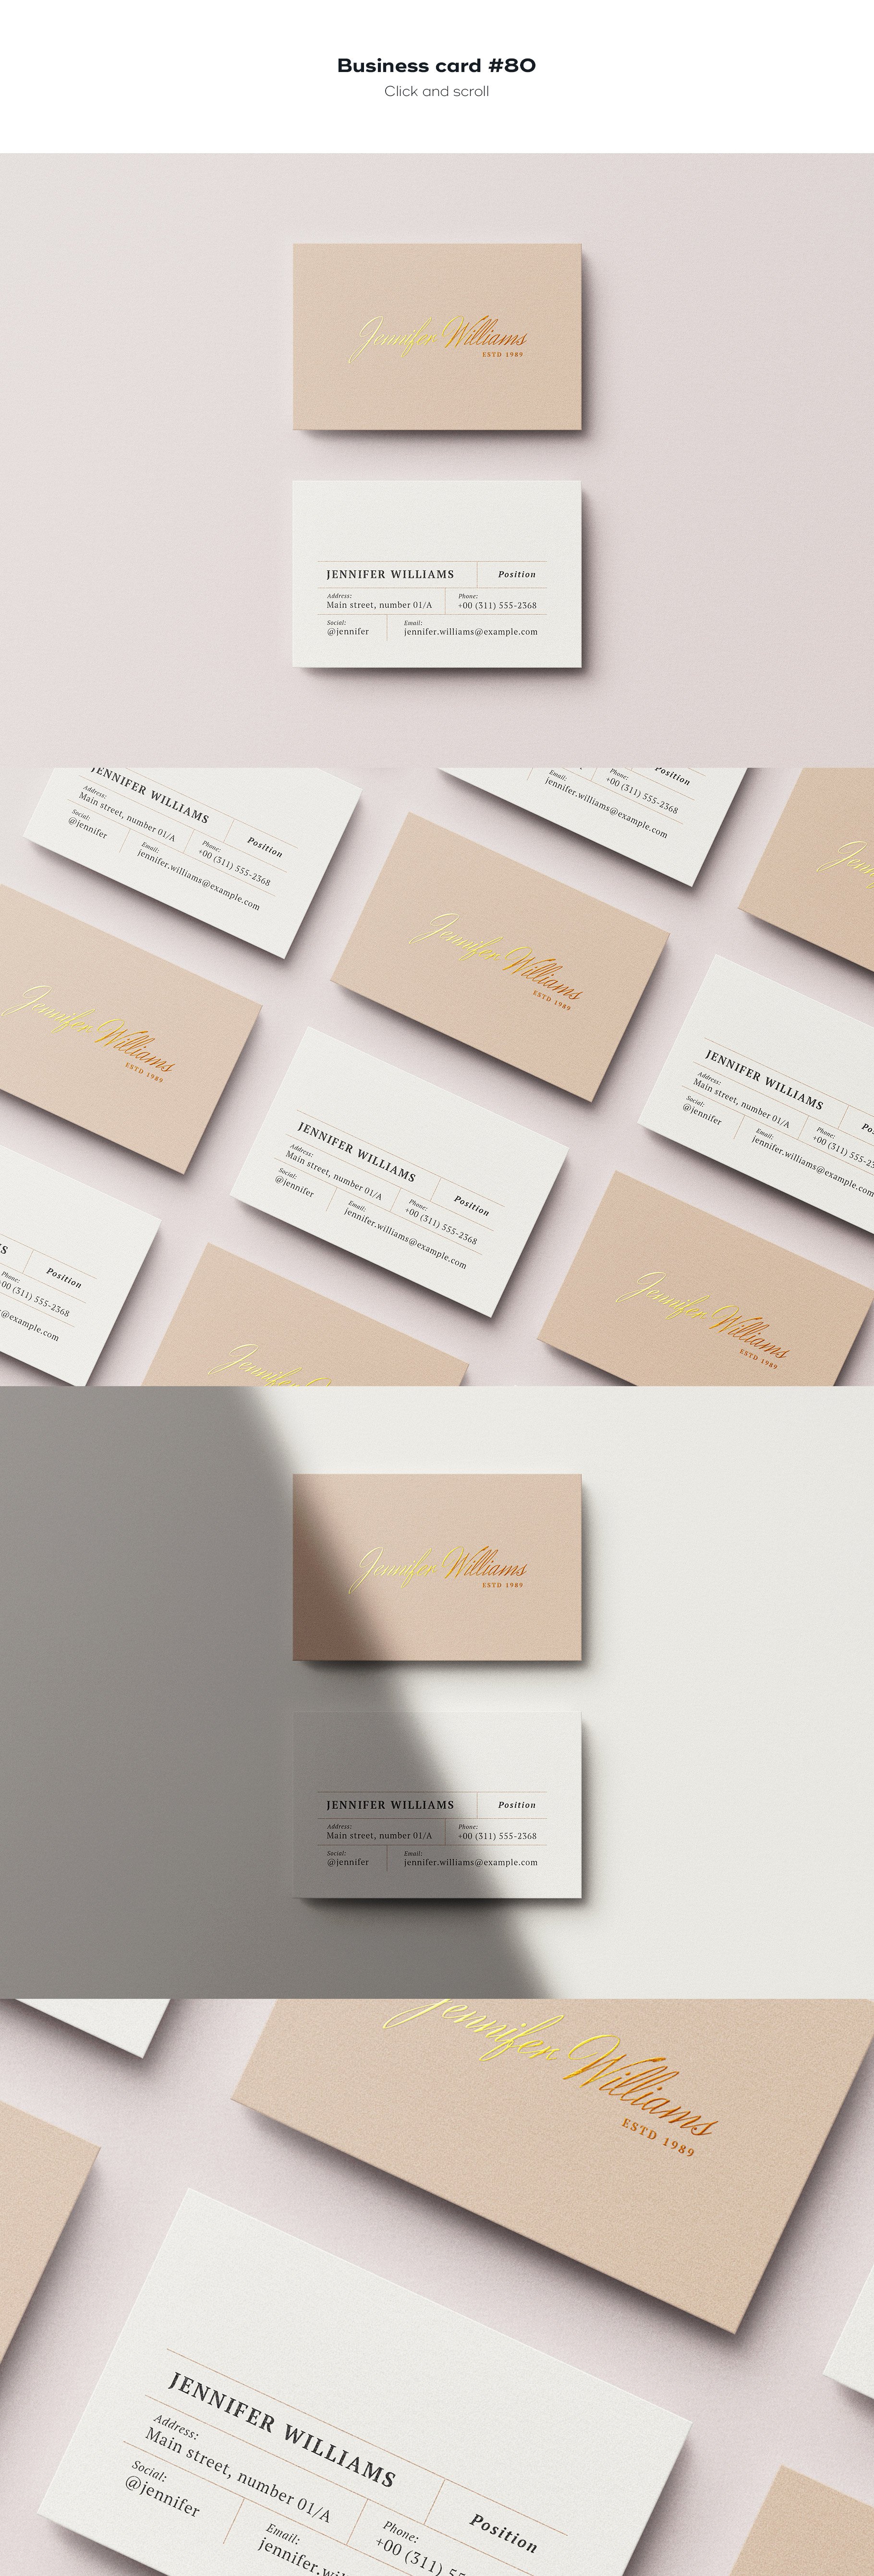 business card 80 585